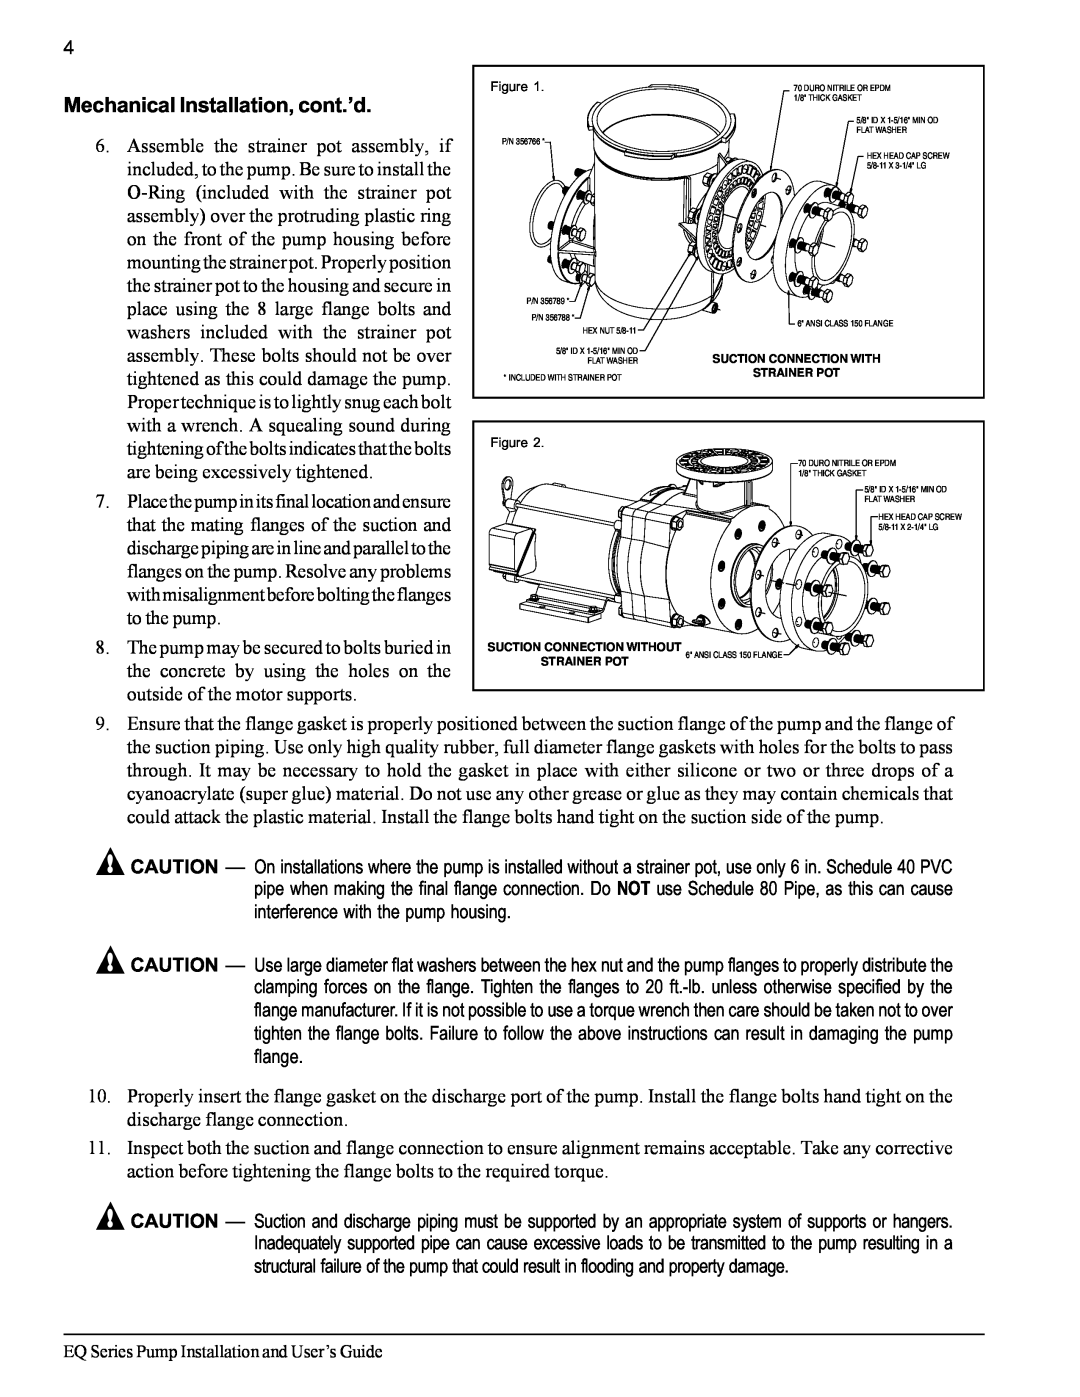 Pentair EQ SERIES important safety instructions Mechanical Installation, cont.’d 